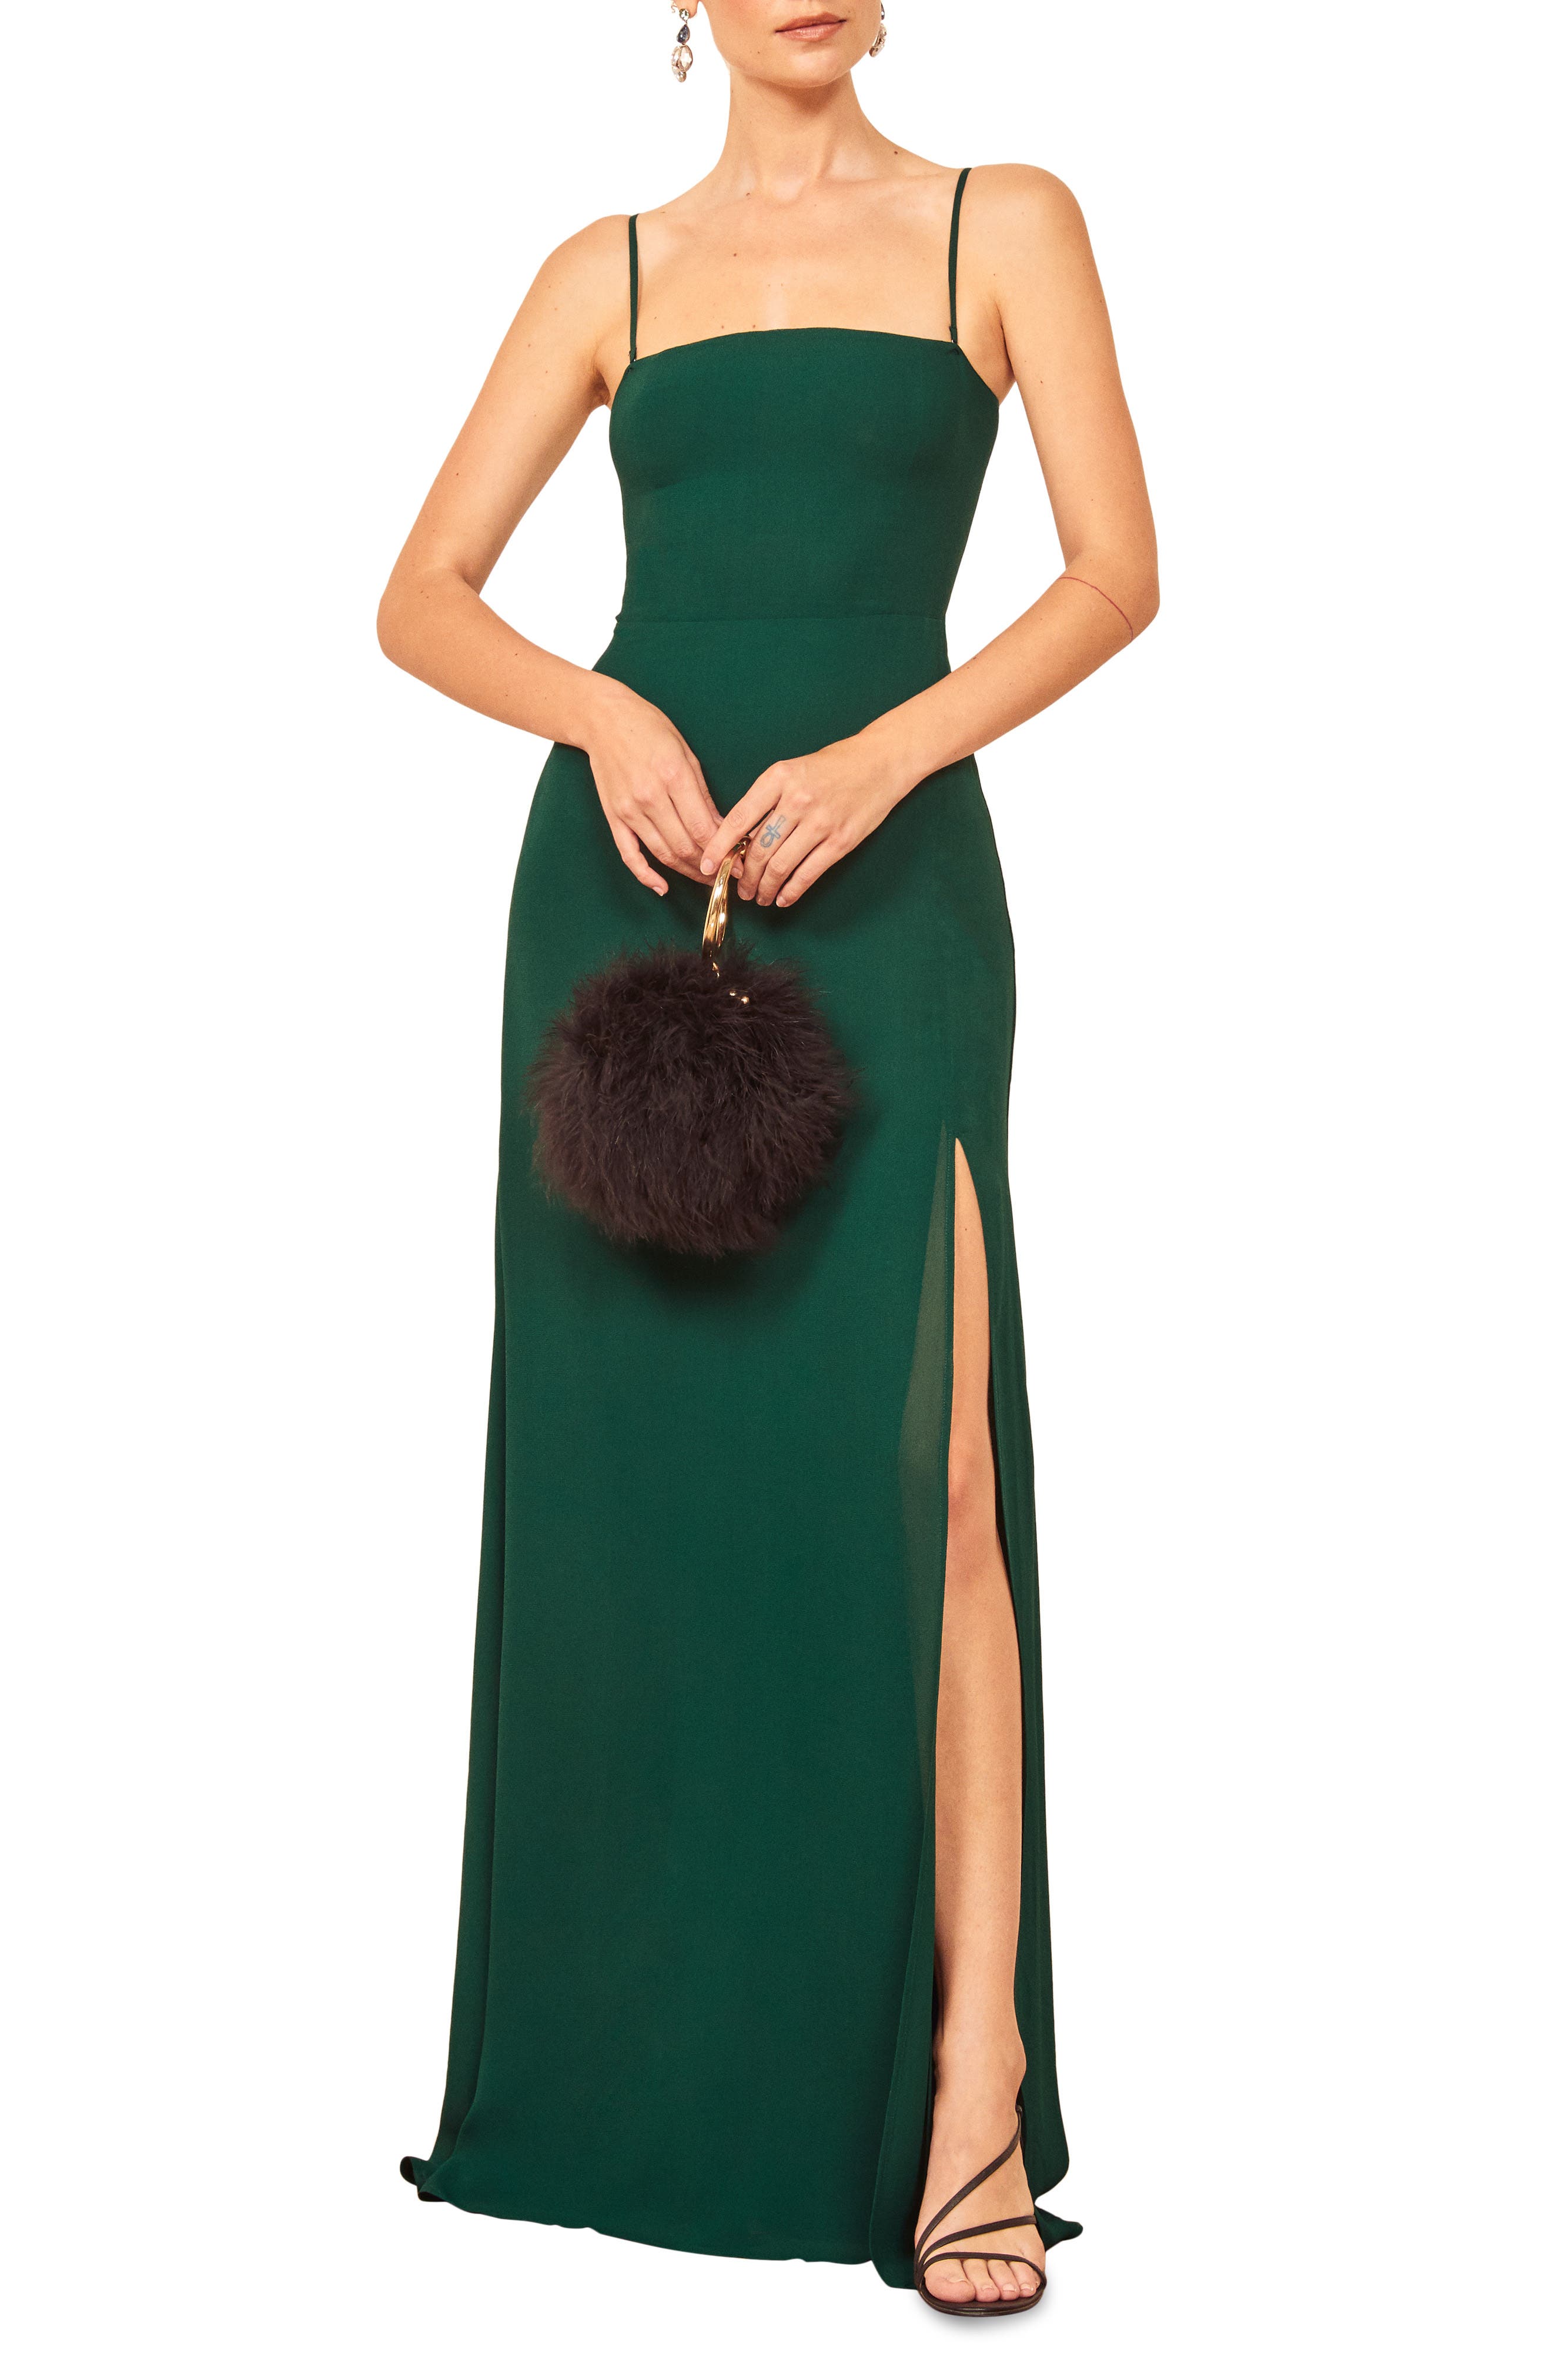 Reformation Ingrid Maxi Dress in Emerald at Nordstrom, Size 4